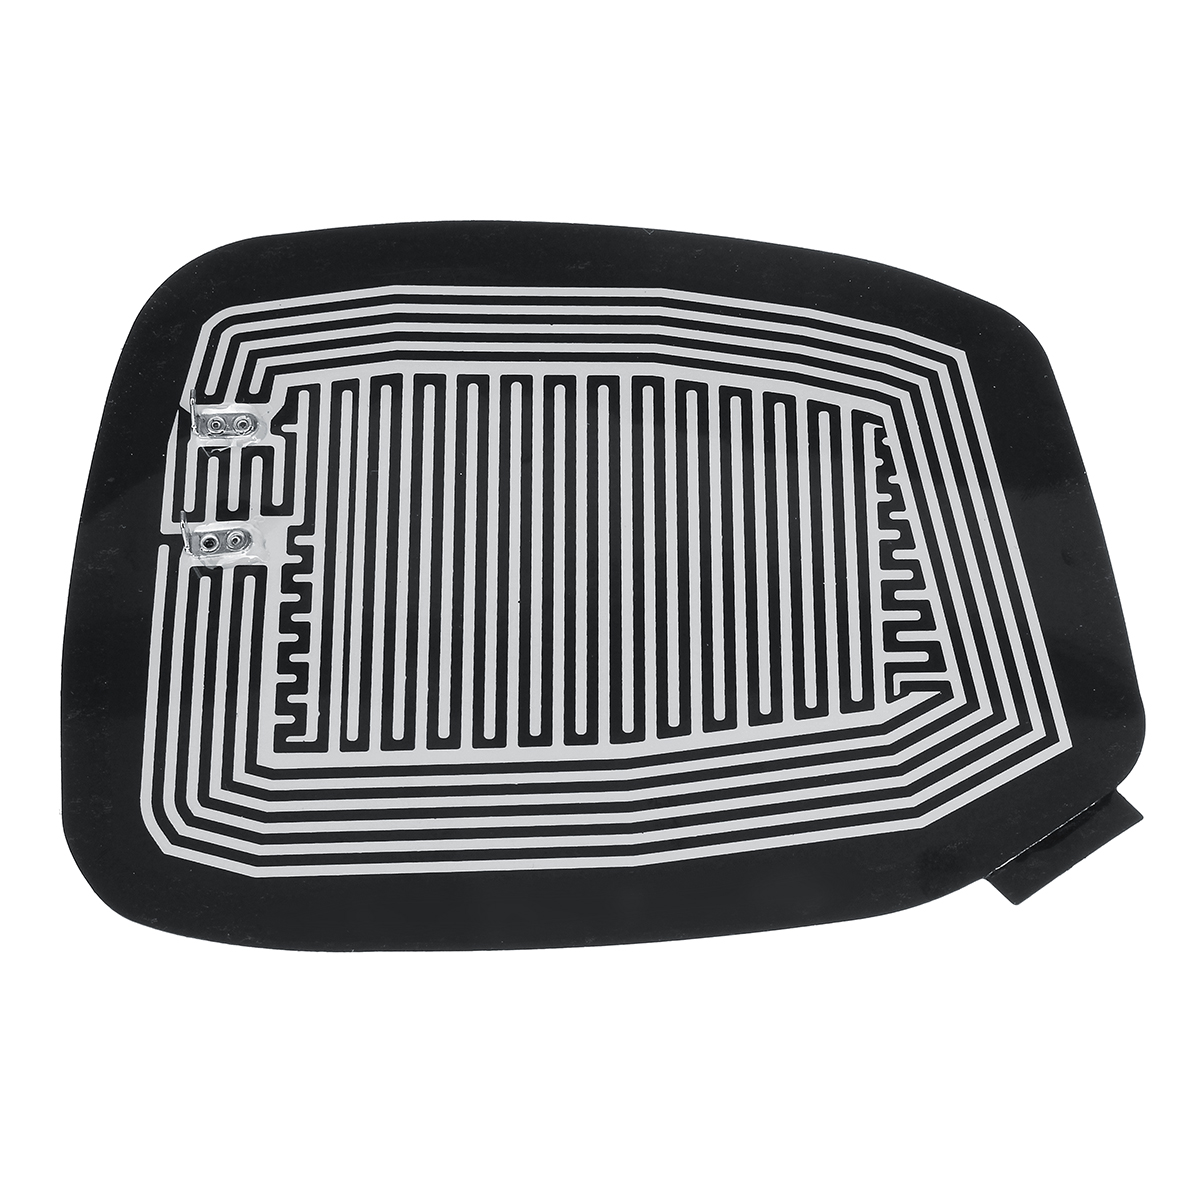 Fast Universal DC 12V Electric Rearview Car Mirror Glass Heated Heating Pad Mat Defoggers - Auto GoShop